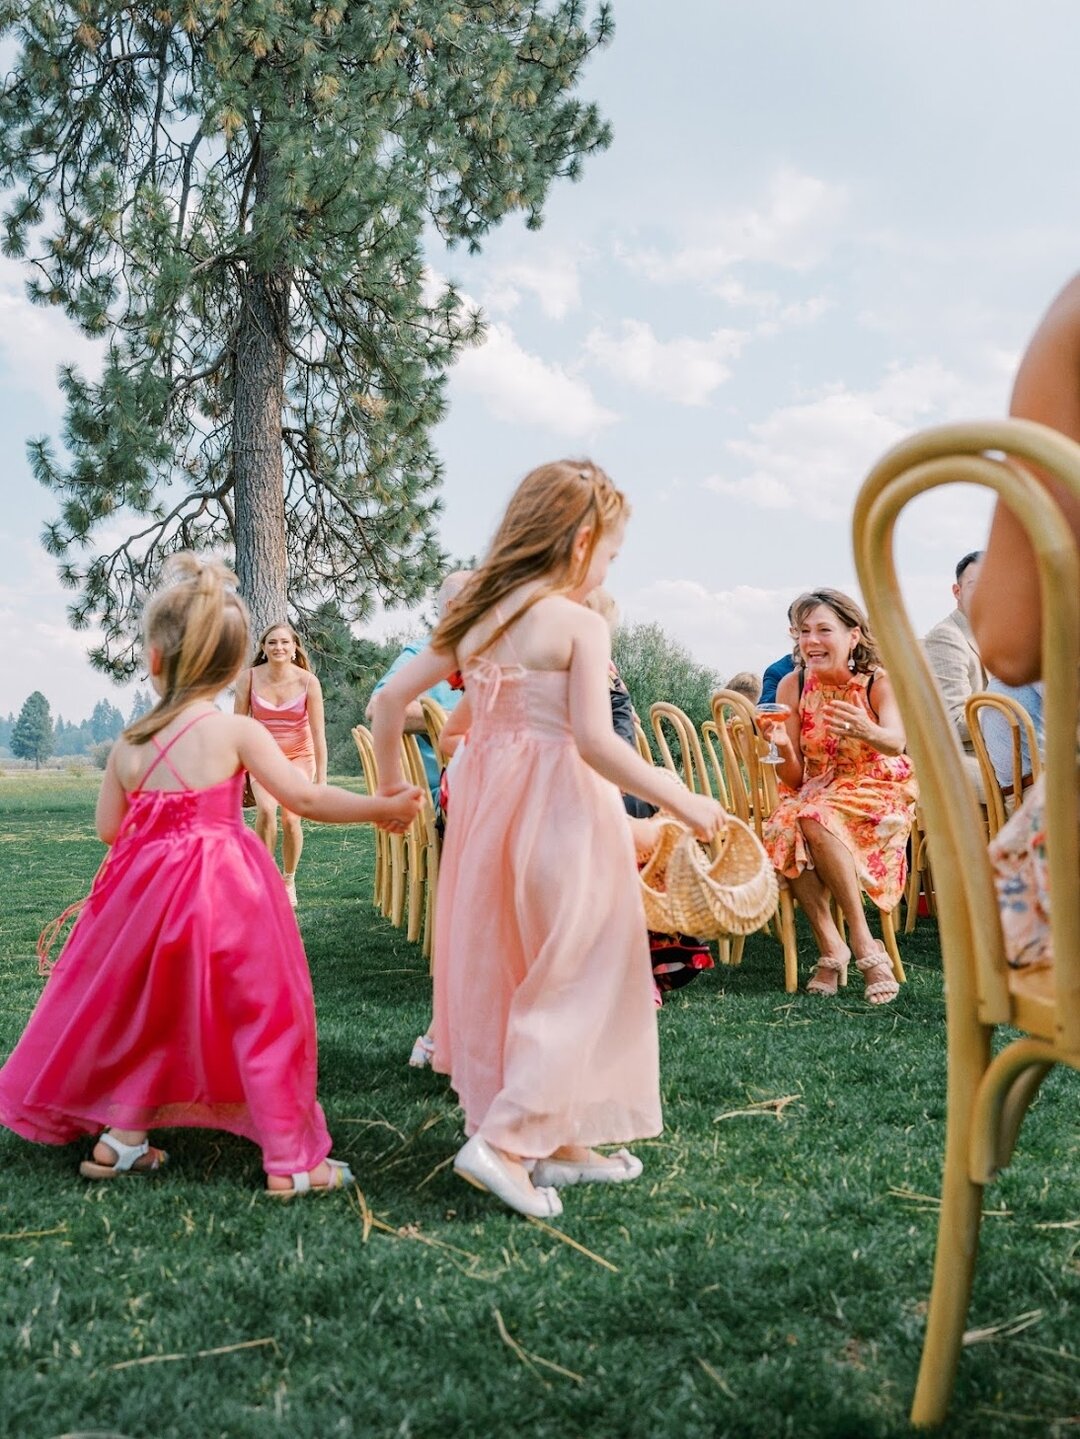 Hana + Kyle were not afraid of utilizing color in their big day. And we have to say, they absolutely smashed it with these perfect peachy tones. 

📷 @rtfaithphotography
@danielledemarcosmith
@blackbutteranchweddings
@flipflopsounds
@bendvwphotobus
@